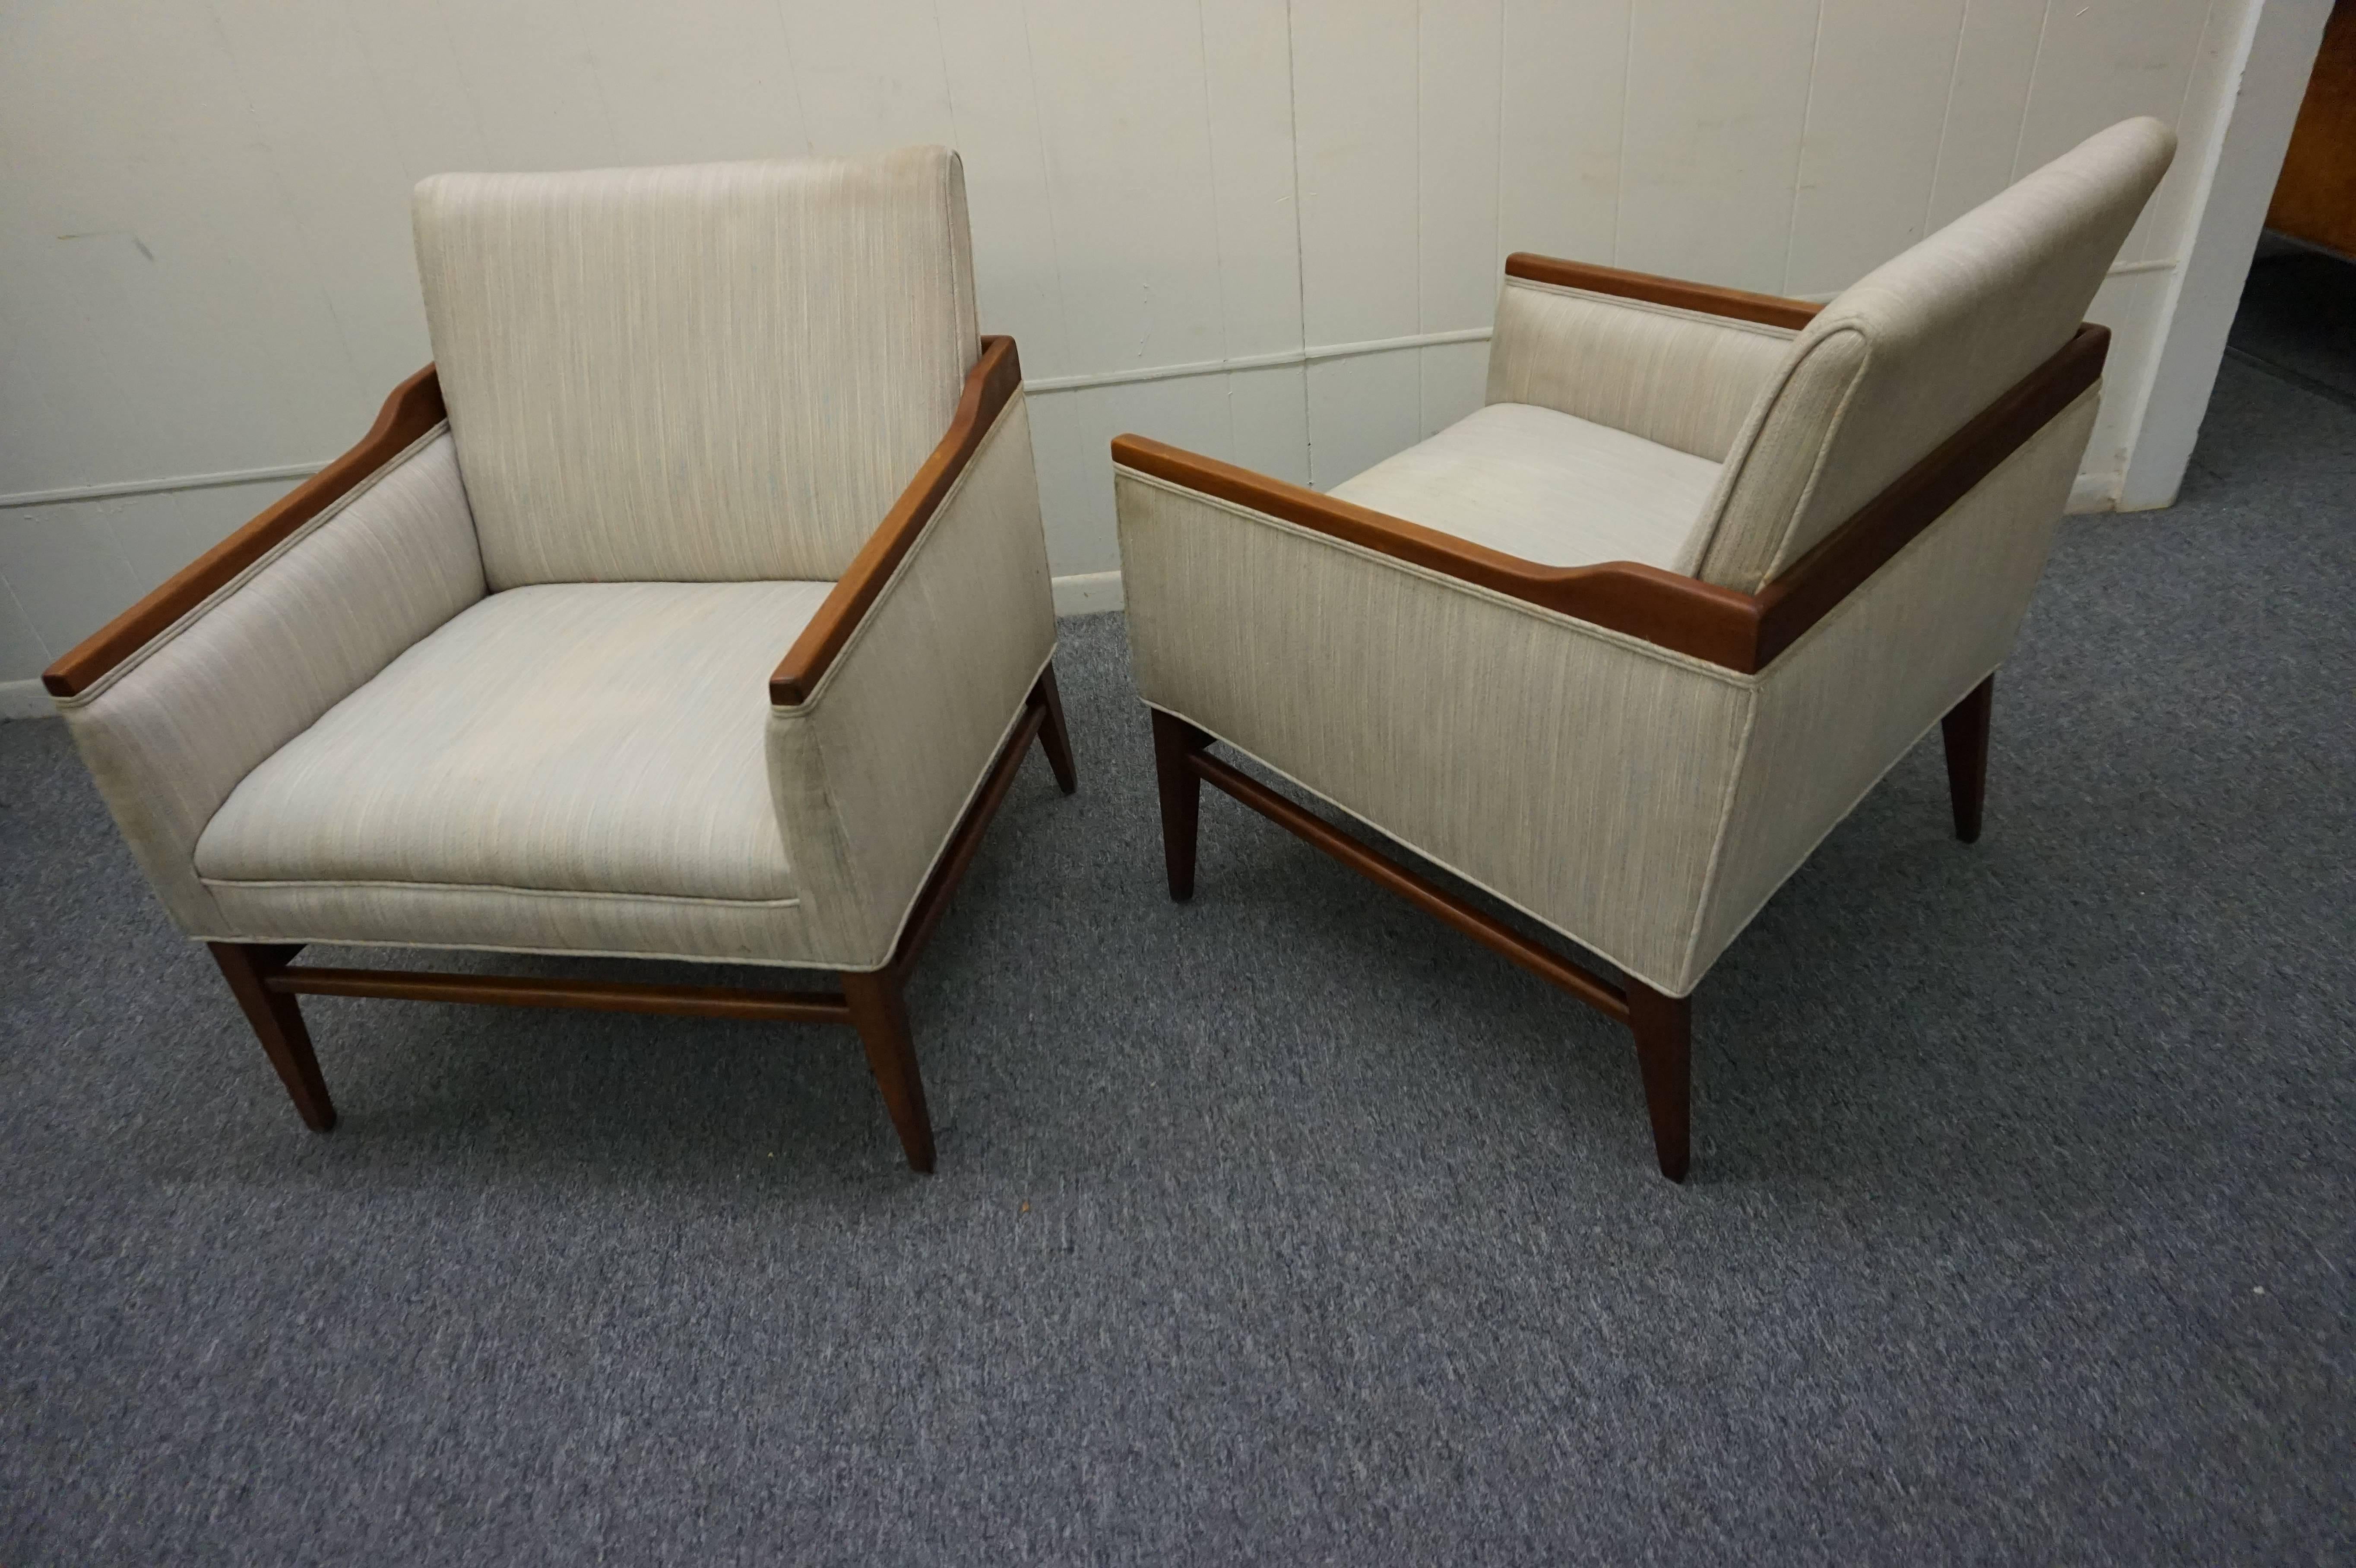 Stunning Pair of American Mid-Century Modern Walnut Lounge Chairs For Sale 5